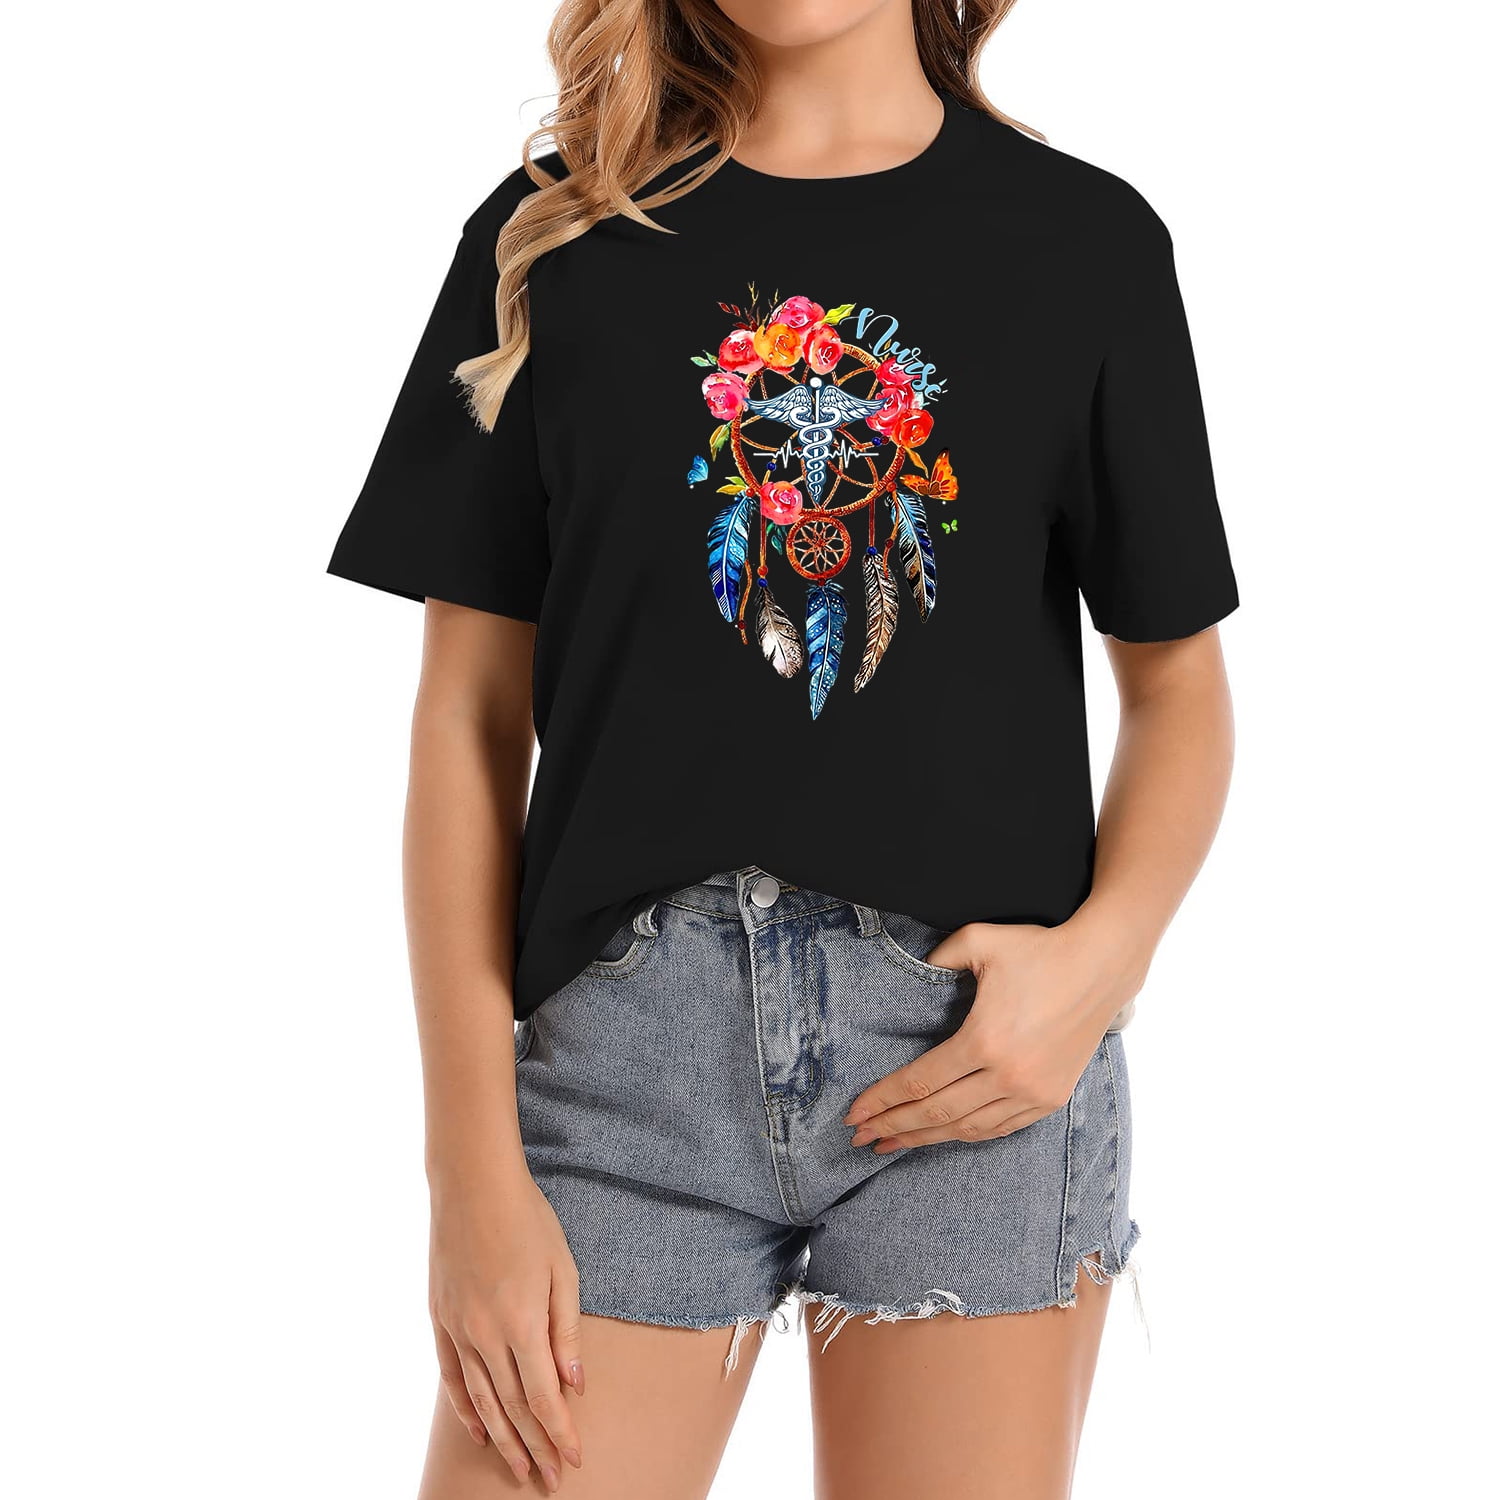 Awesome Nurse Dreamcatcher Fashionable and Comfortable Graphic Tee for  Women's Summer Wardrobe 